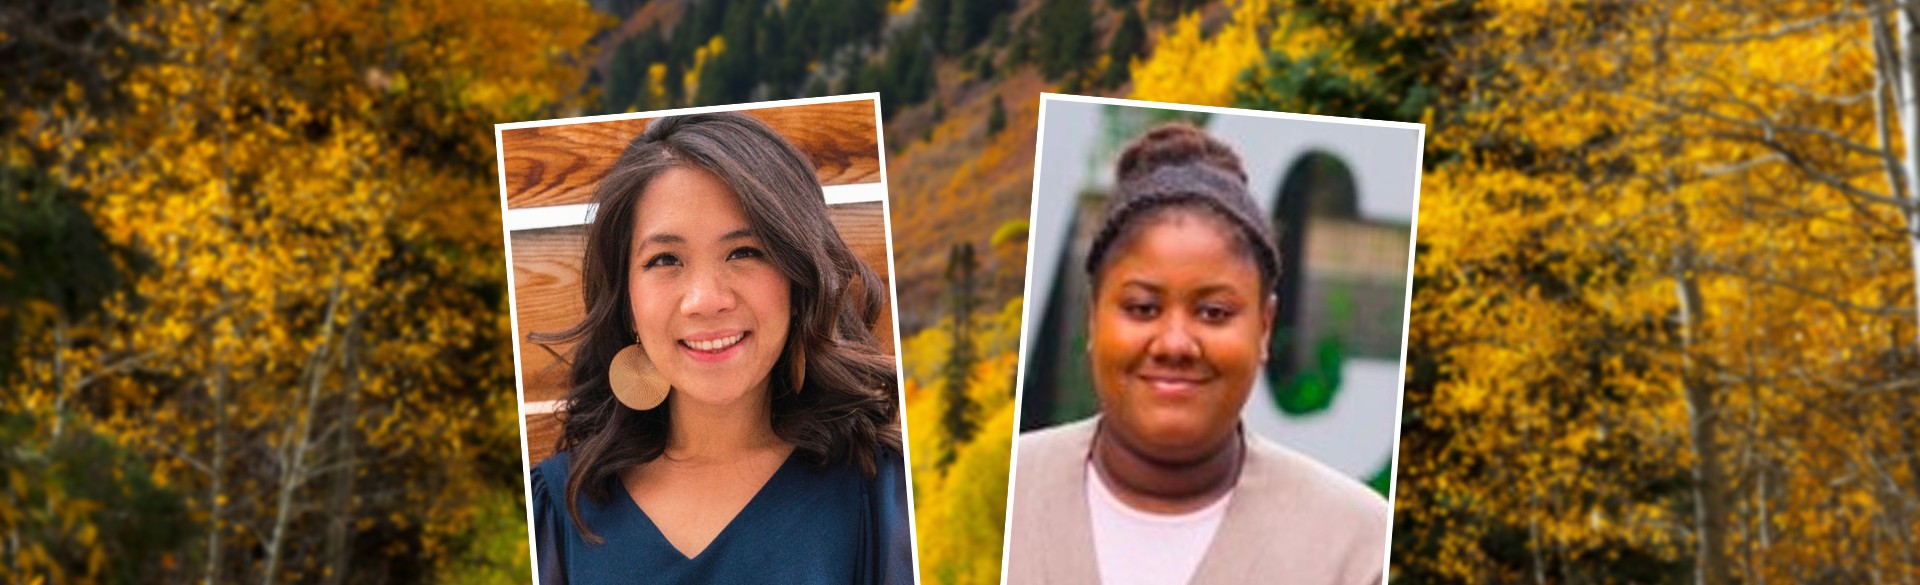 Two women smiling in headshots on background of Colorado mountains